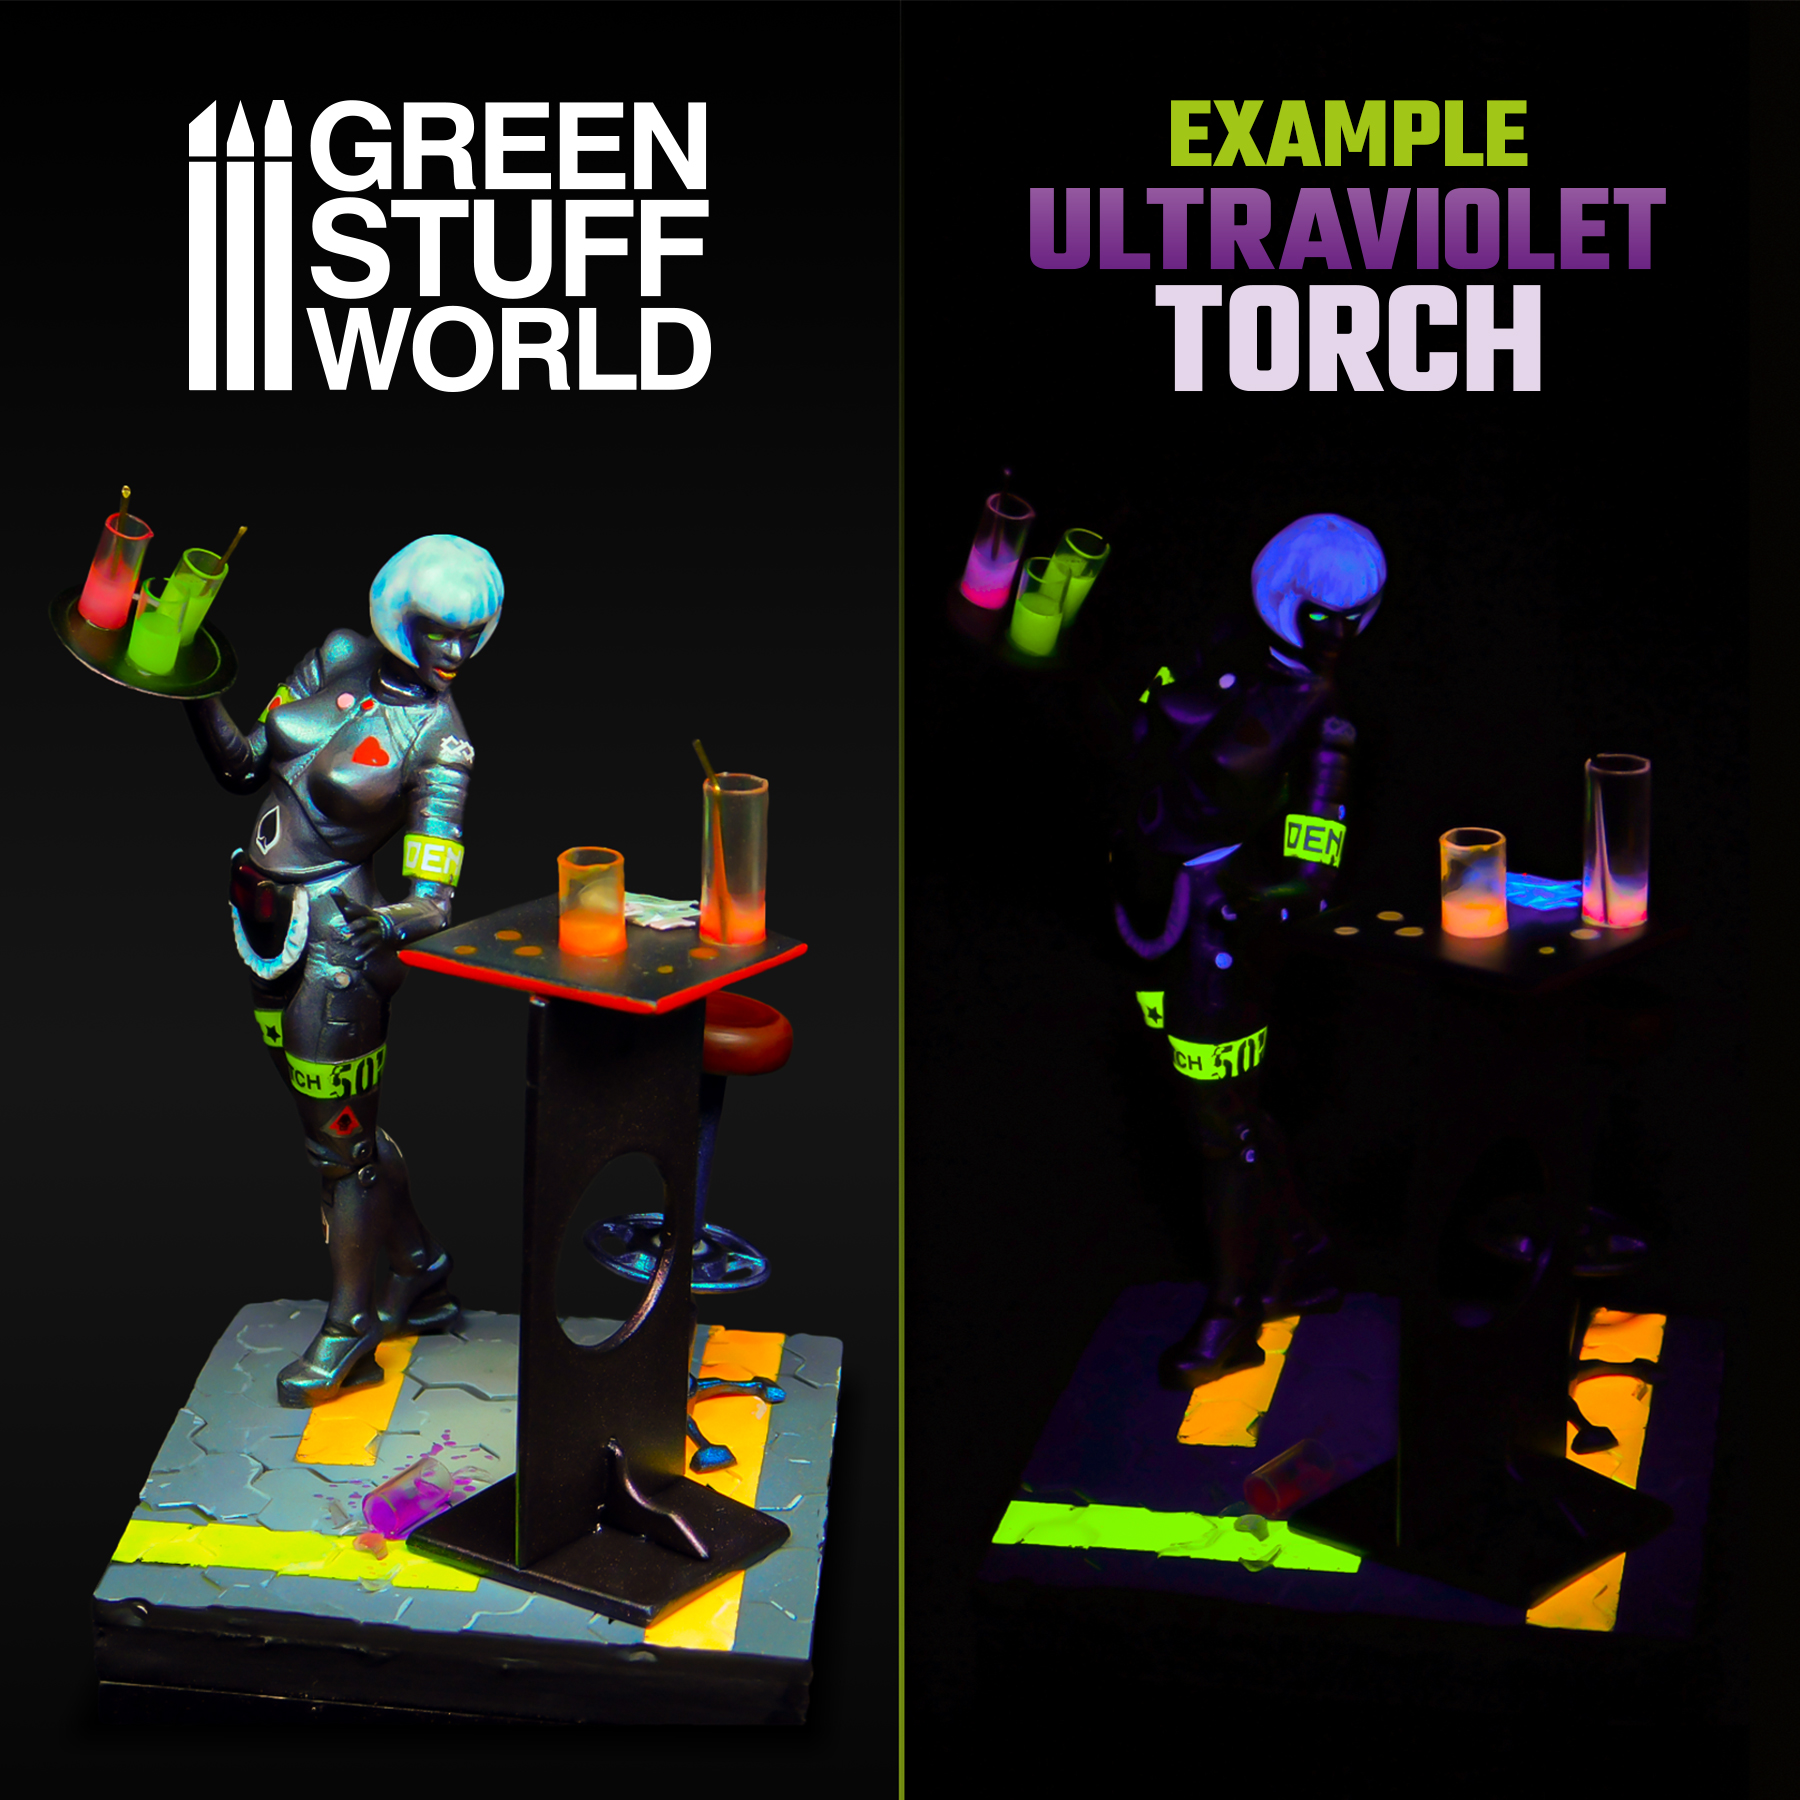 uv-torch-example-with-fluor